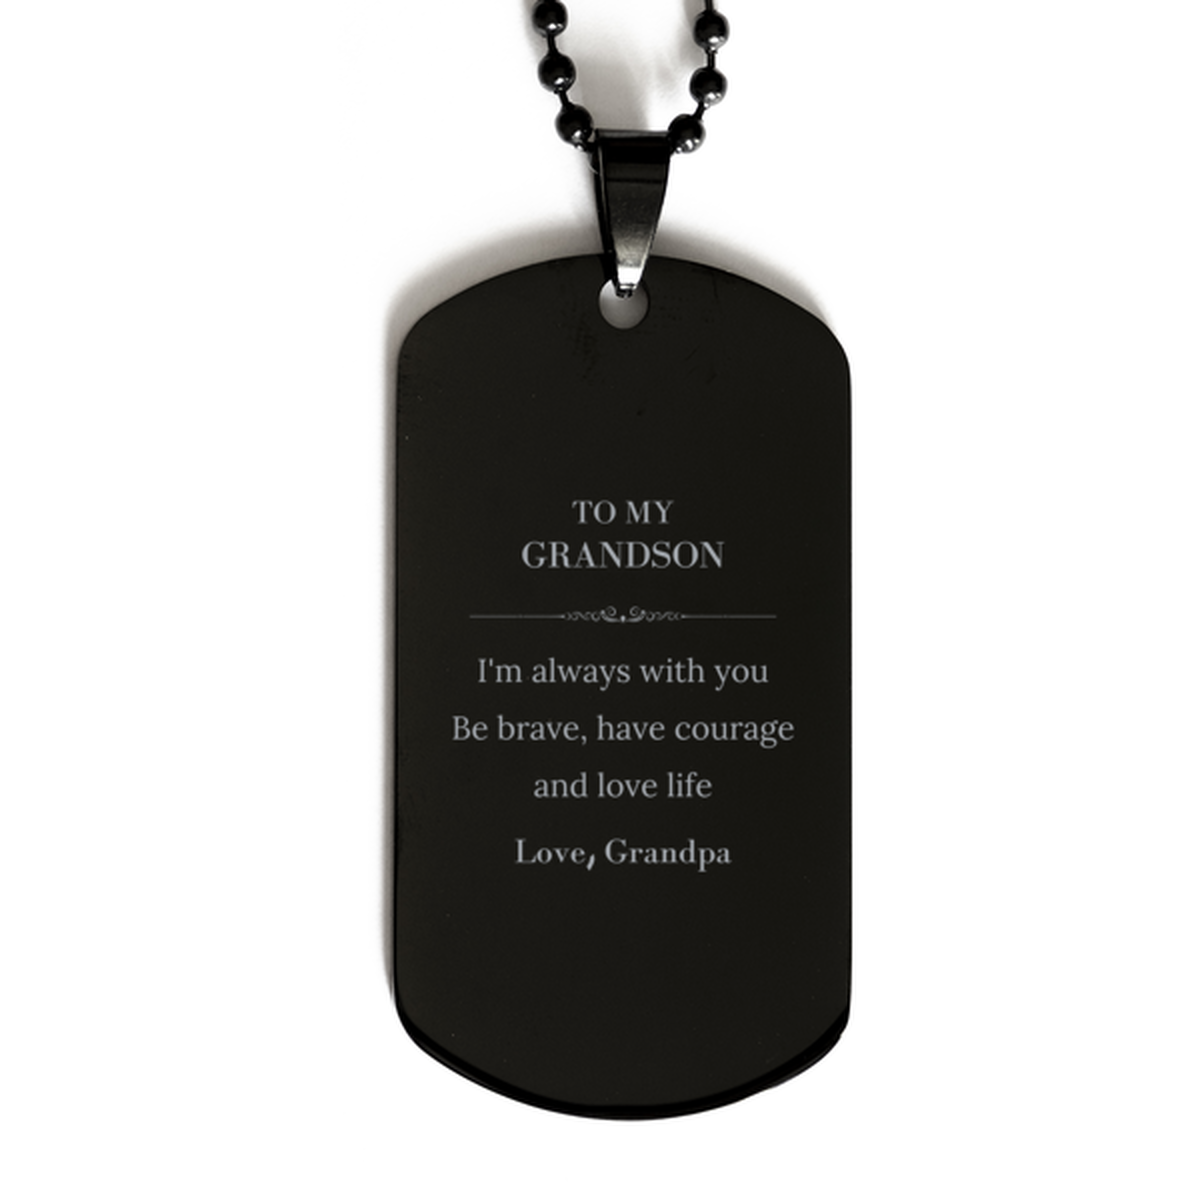 To My Grandson Gifts from Grandpa, Unique Black Dog Tag Inspirational Christmas Birthday Graduation Gifts for Grandson I'm always with you. Be brave, have courage and love life. Love, Grandpa